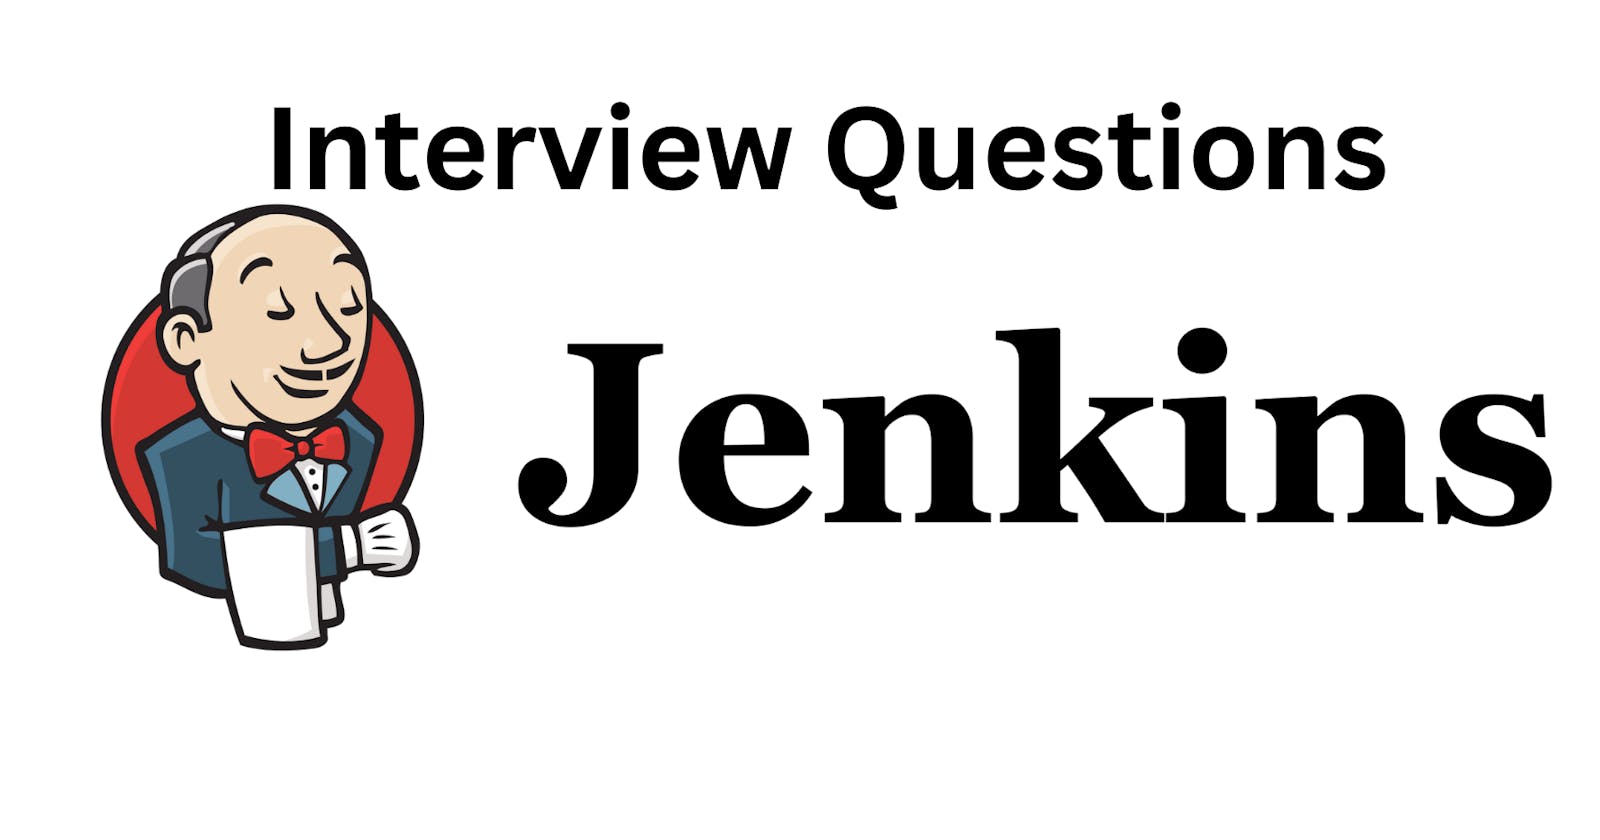 Jenkins Important interview Questions